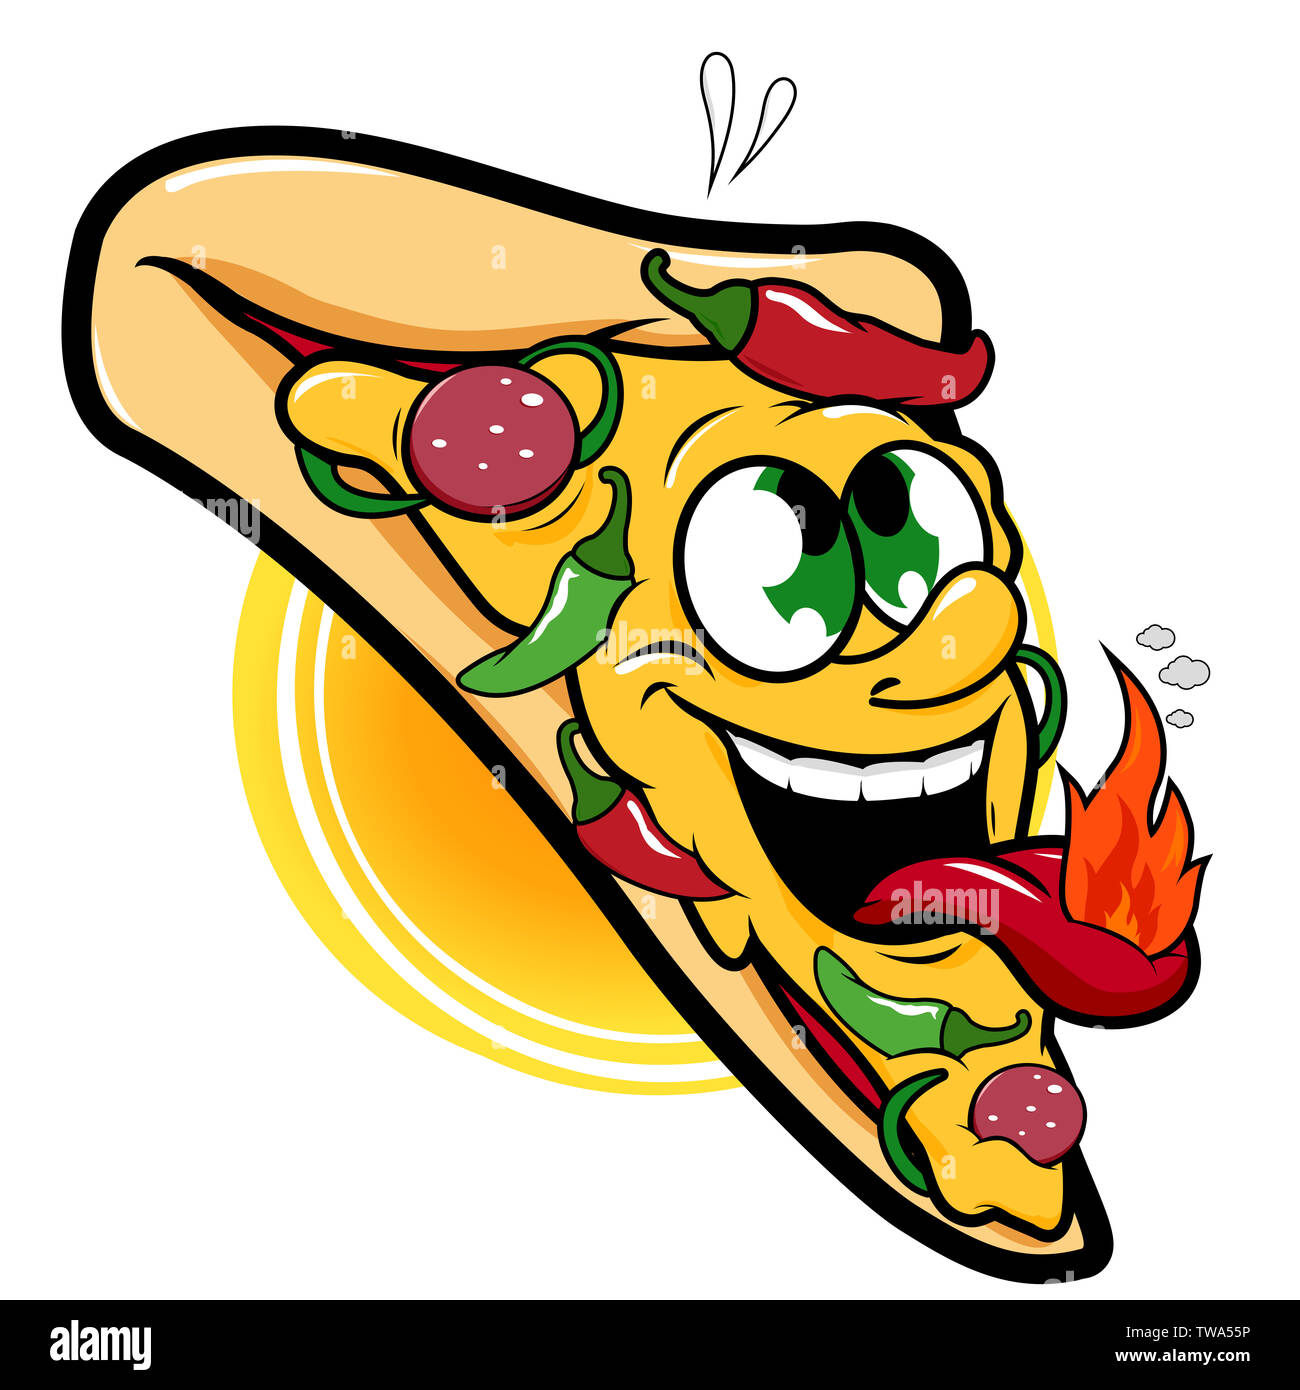 Vector Illustration of a spicy hot pepper pizza slice character. Stock Photo